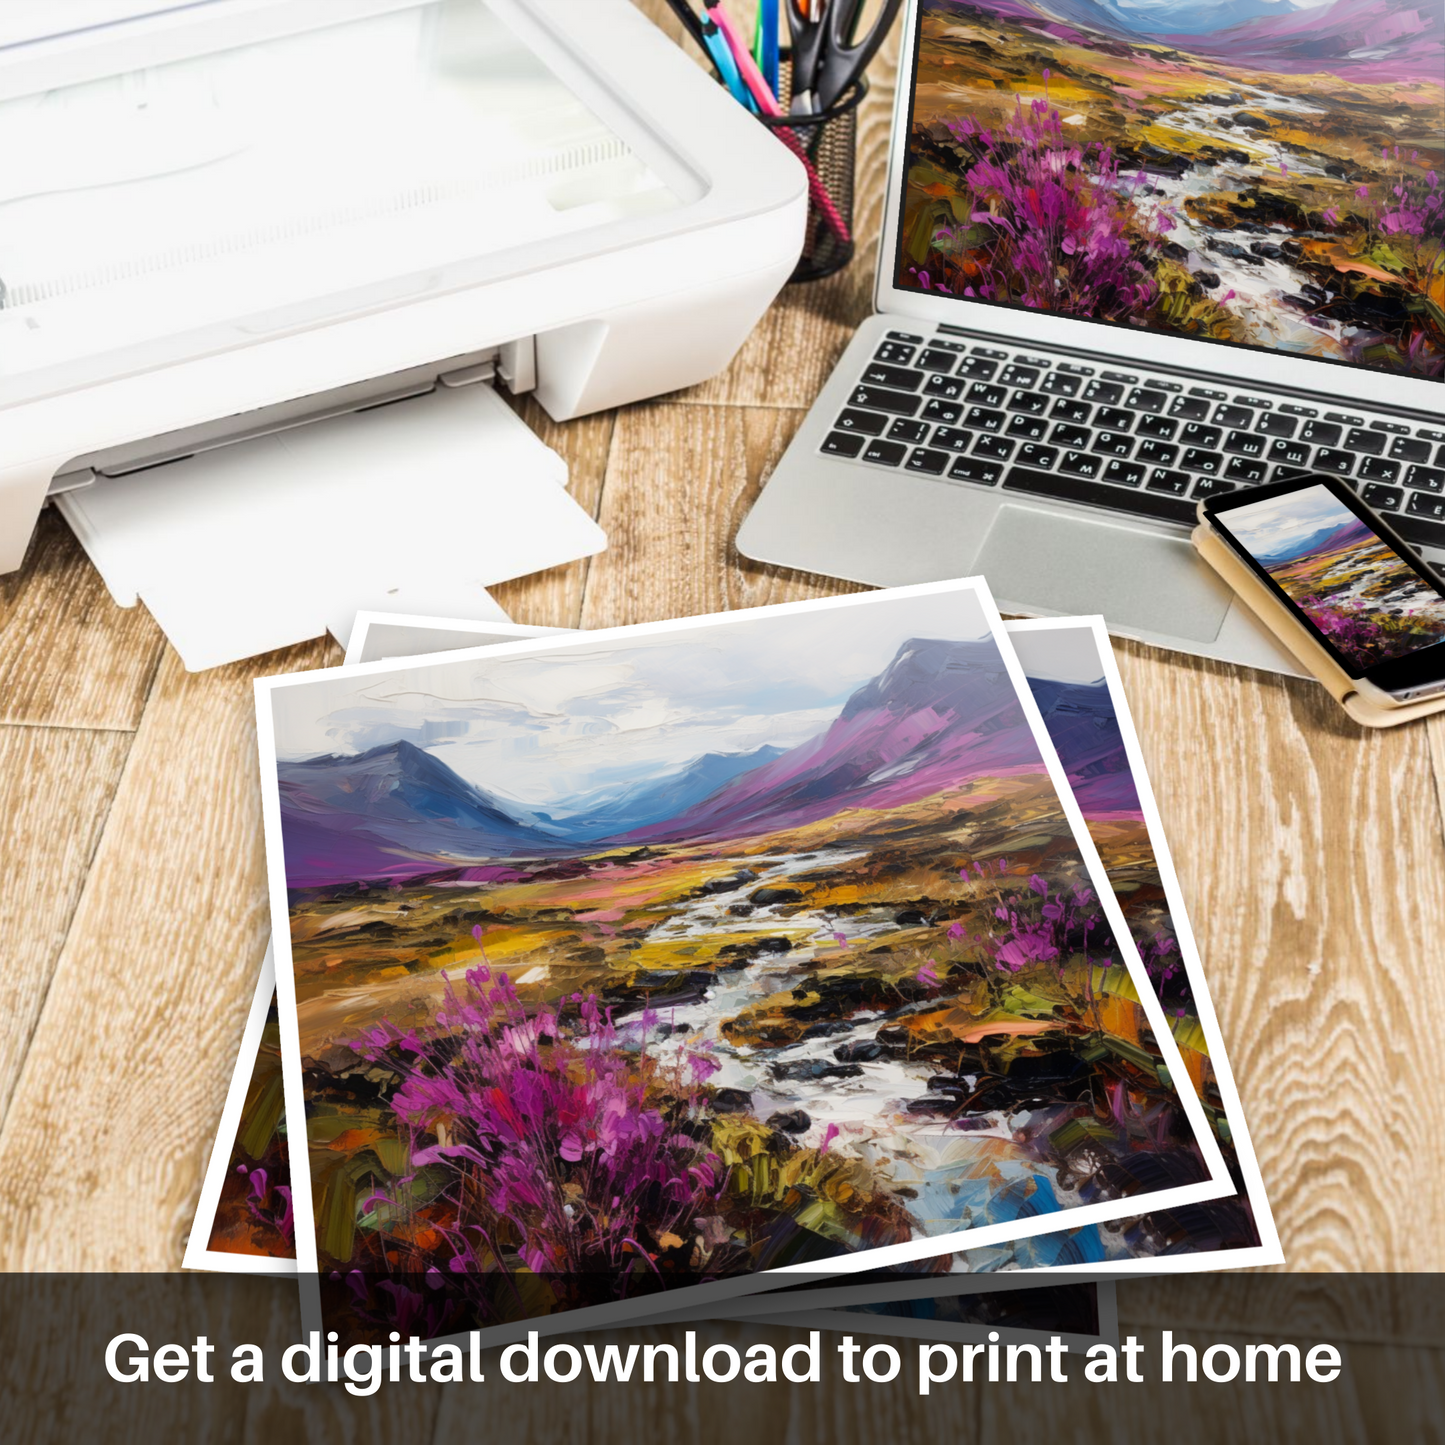 Downloadable and printable picture of Purple heather in Glencoe